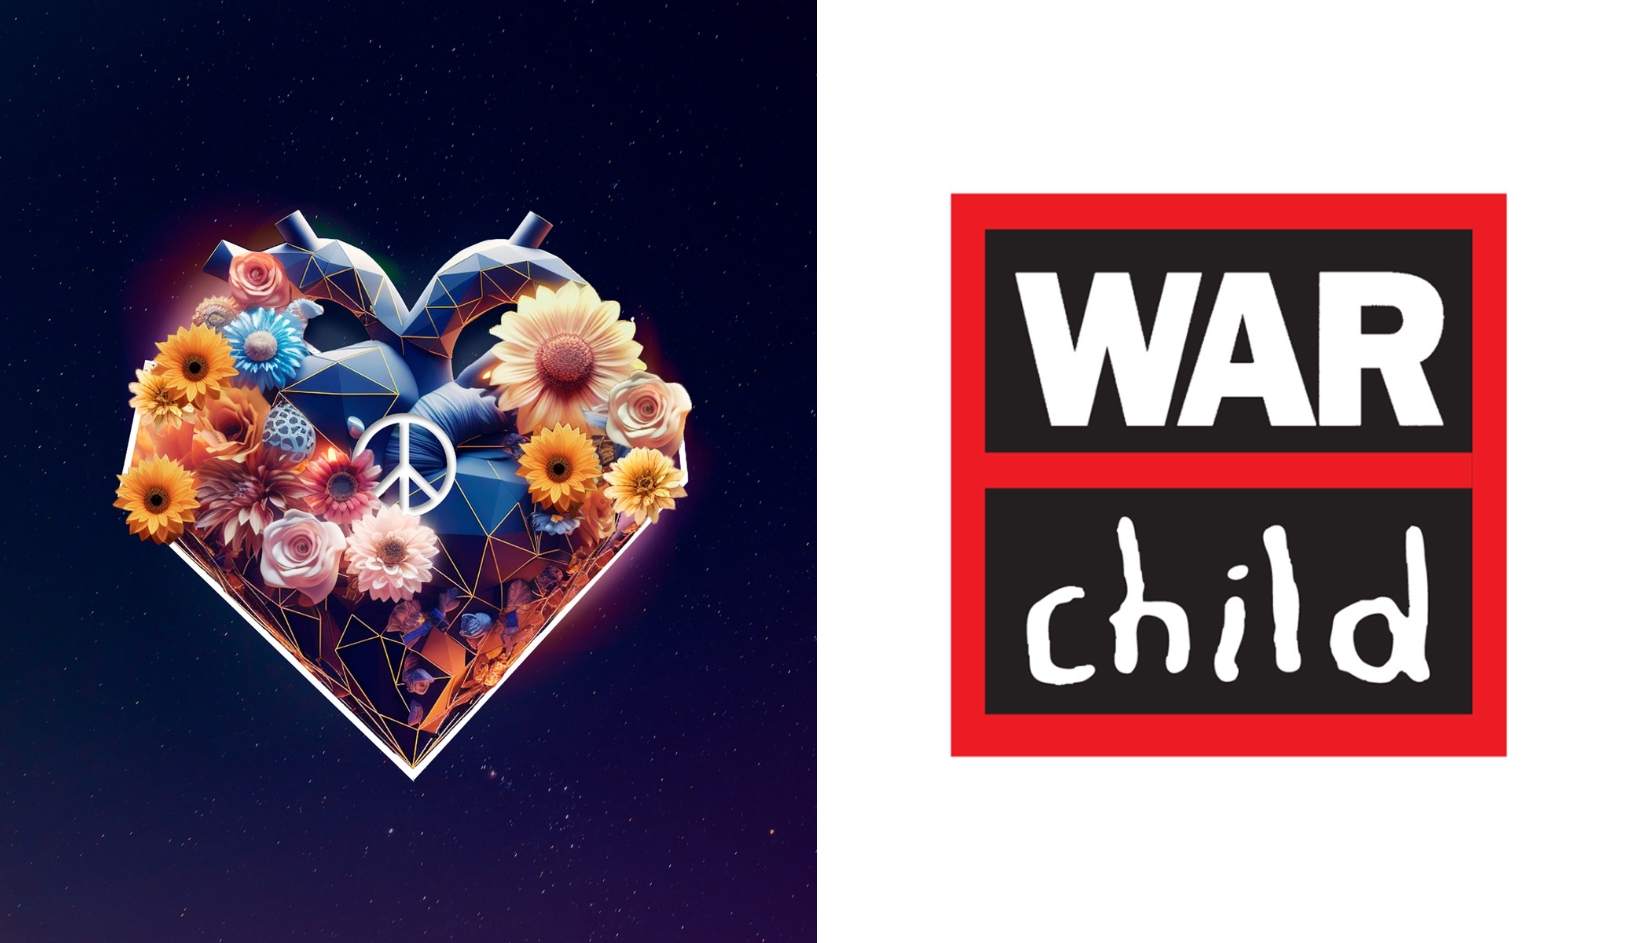 House Music With Love Launches Charity Compilation in Aid of War Child